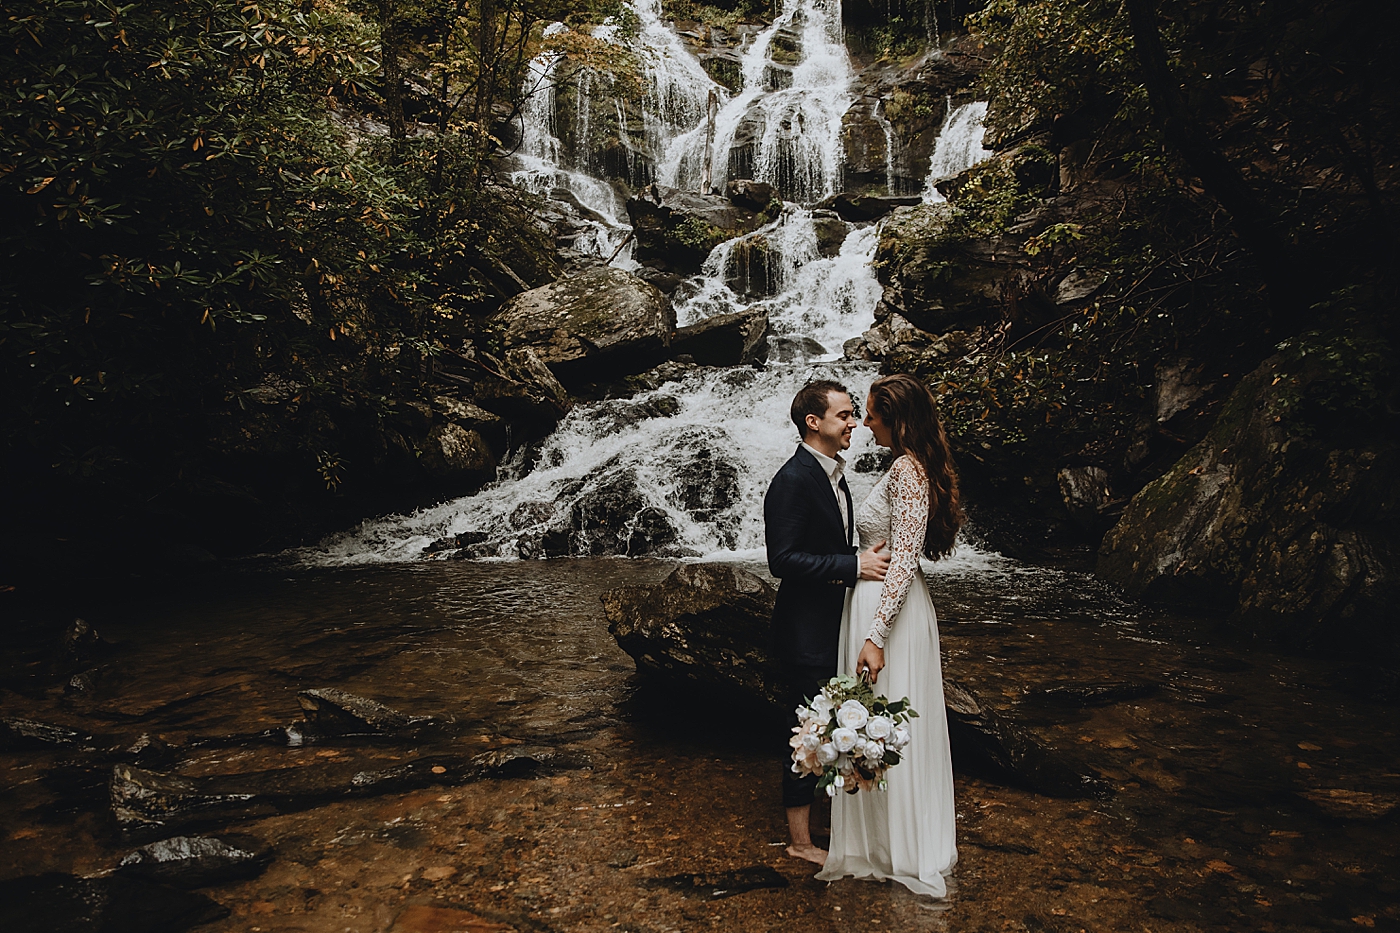 Bride and Groom holding each other in front of rocky water fall Catawba Falls Asheville, NC Elopement Photography captured by Maggie Alvarez Photography